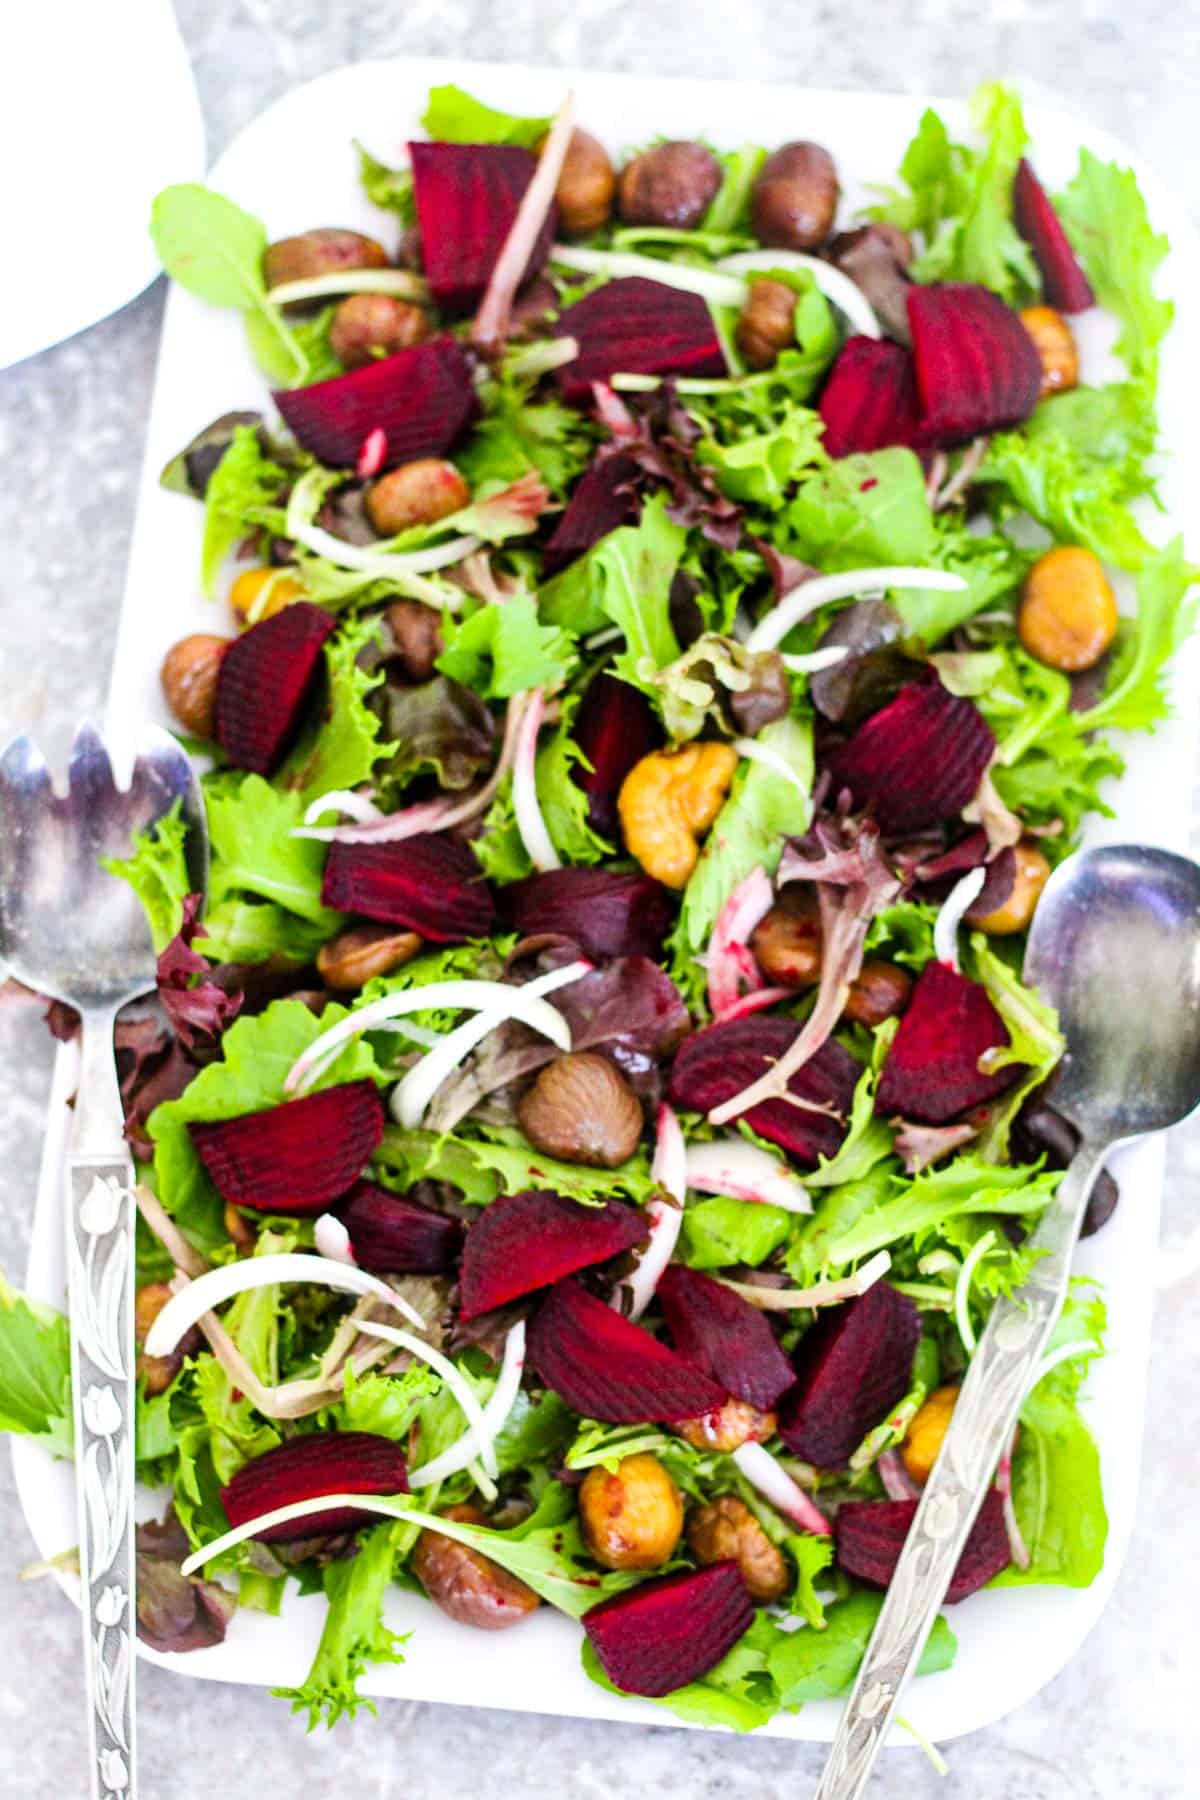 A rectangle shallow dish with a green salad that notably has beets, chestnuts and onions in it. Platter has 2 serving utensils on the side.